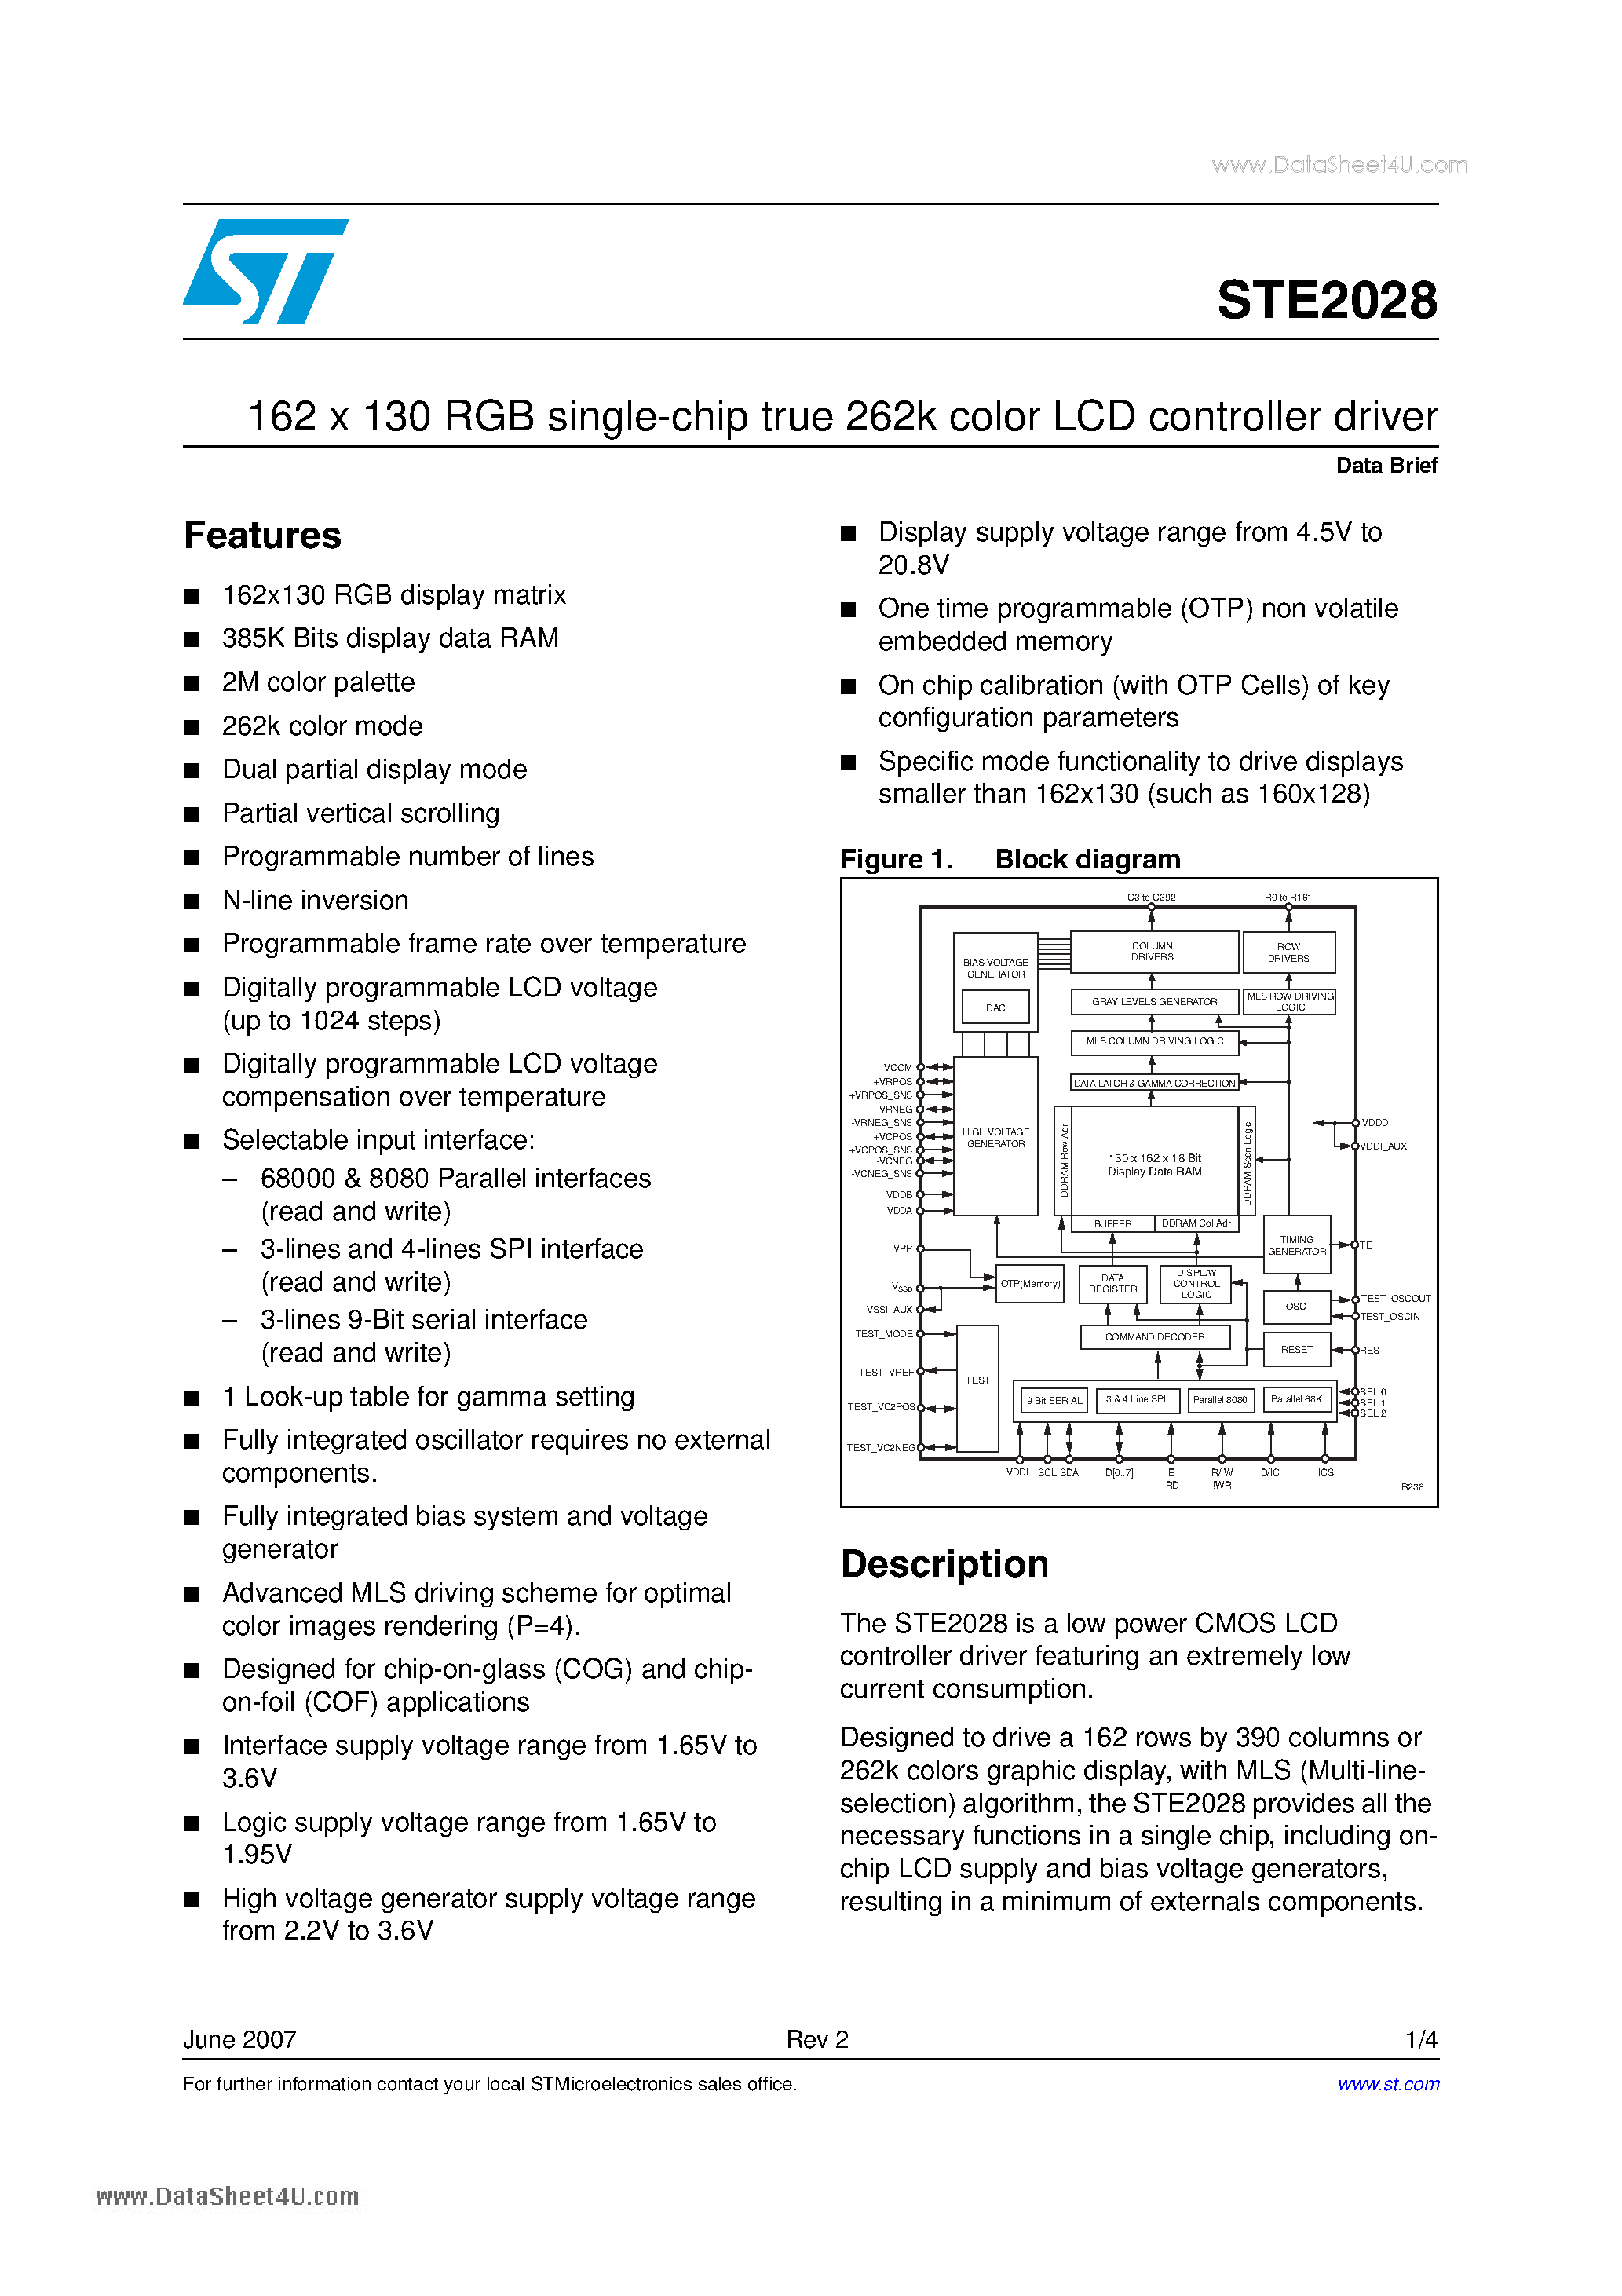 Datasheet STE2028 - 162 X 130 RGB single-chip true 262k color LCD controller driver page 1